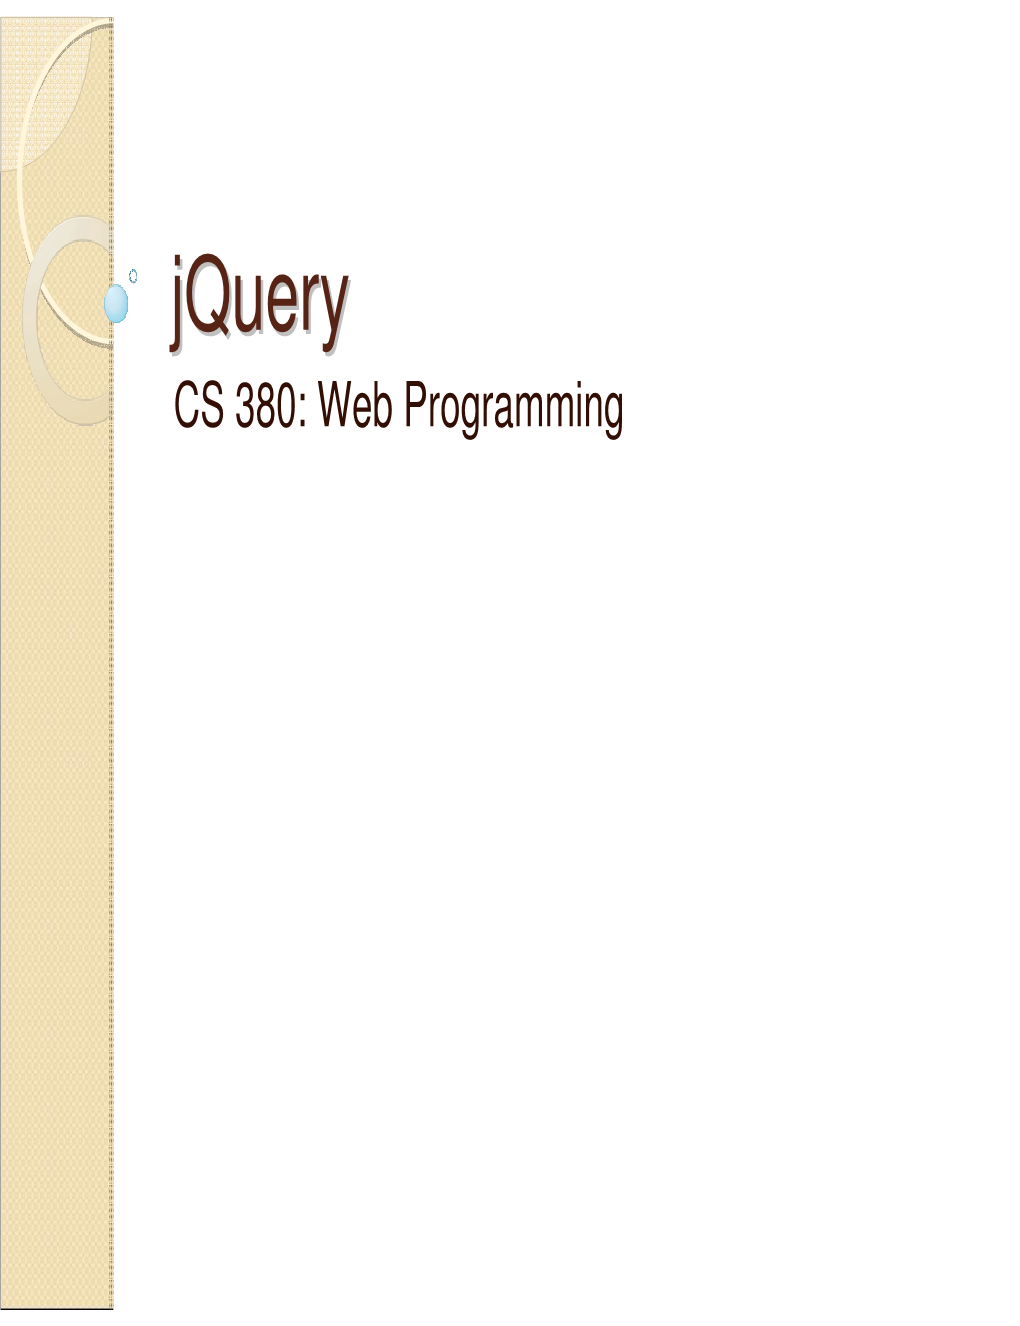 Jqueryjquery CS 380: Web Programming Whatwhat Isis Jquery?Jquery?